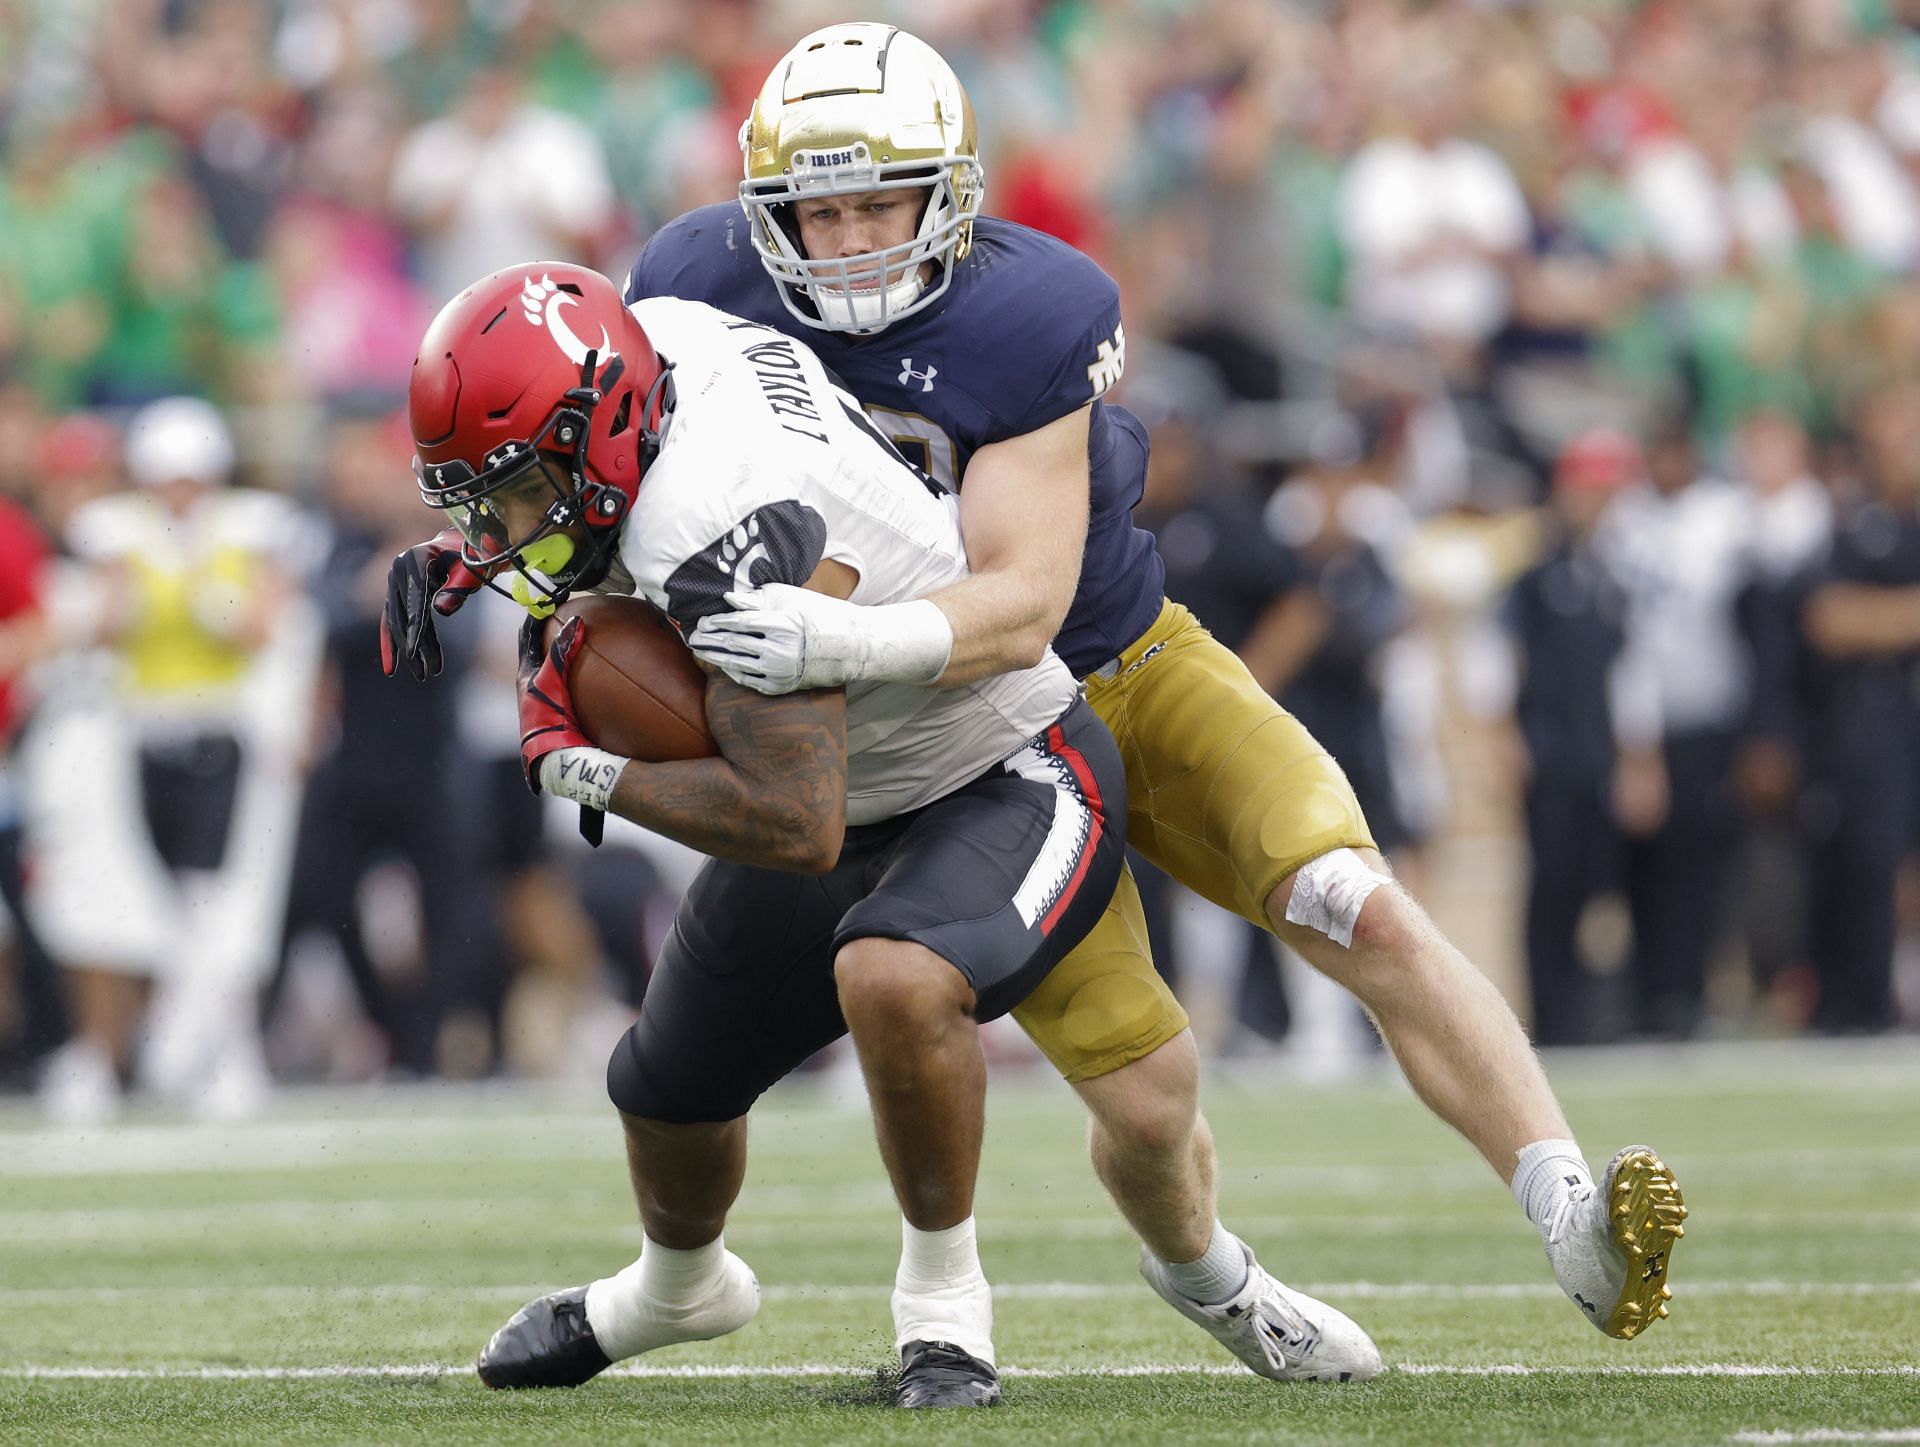 Leonard Taylor #11 of the Cincinnati Bearcats runs the ball after a catch as J.D. Bertrand #27 of the Notre Dame Fighting Irish hangs on for the tackle